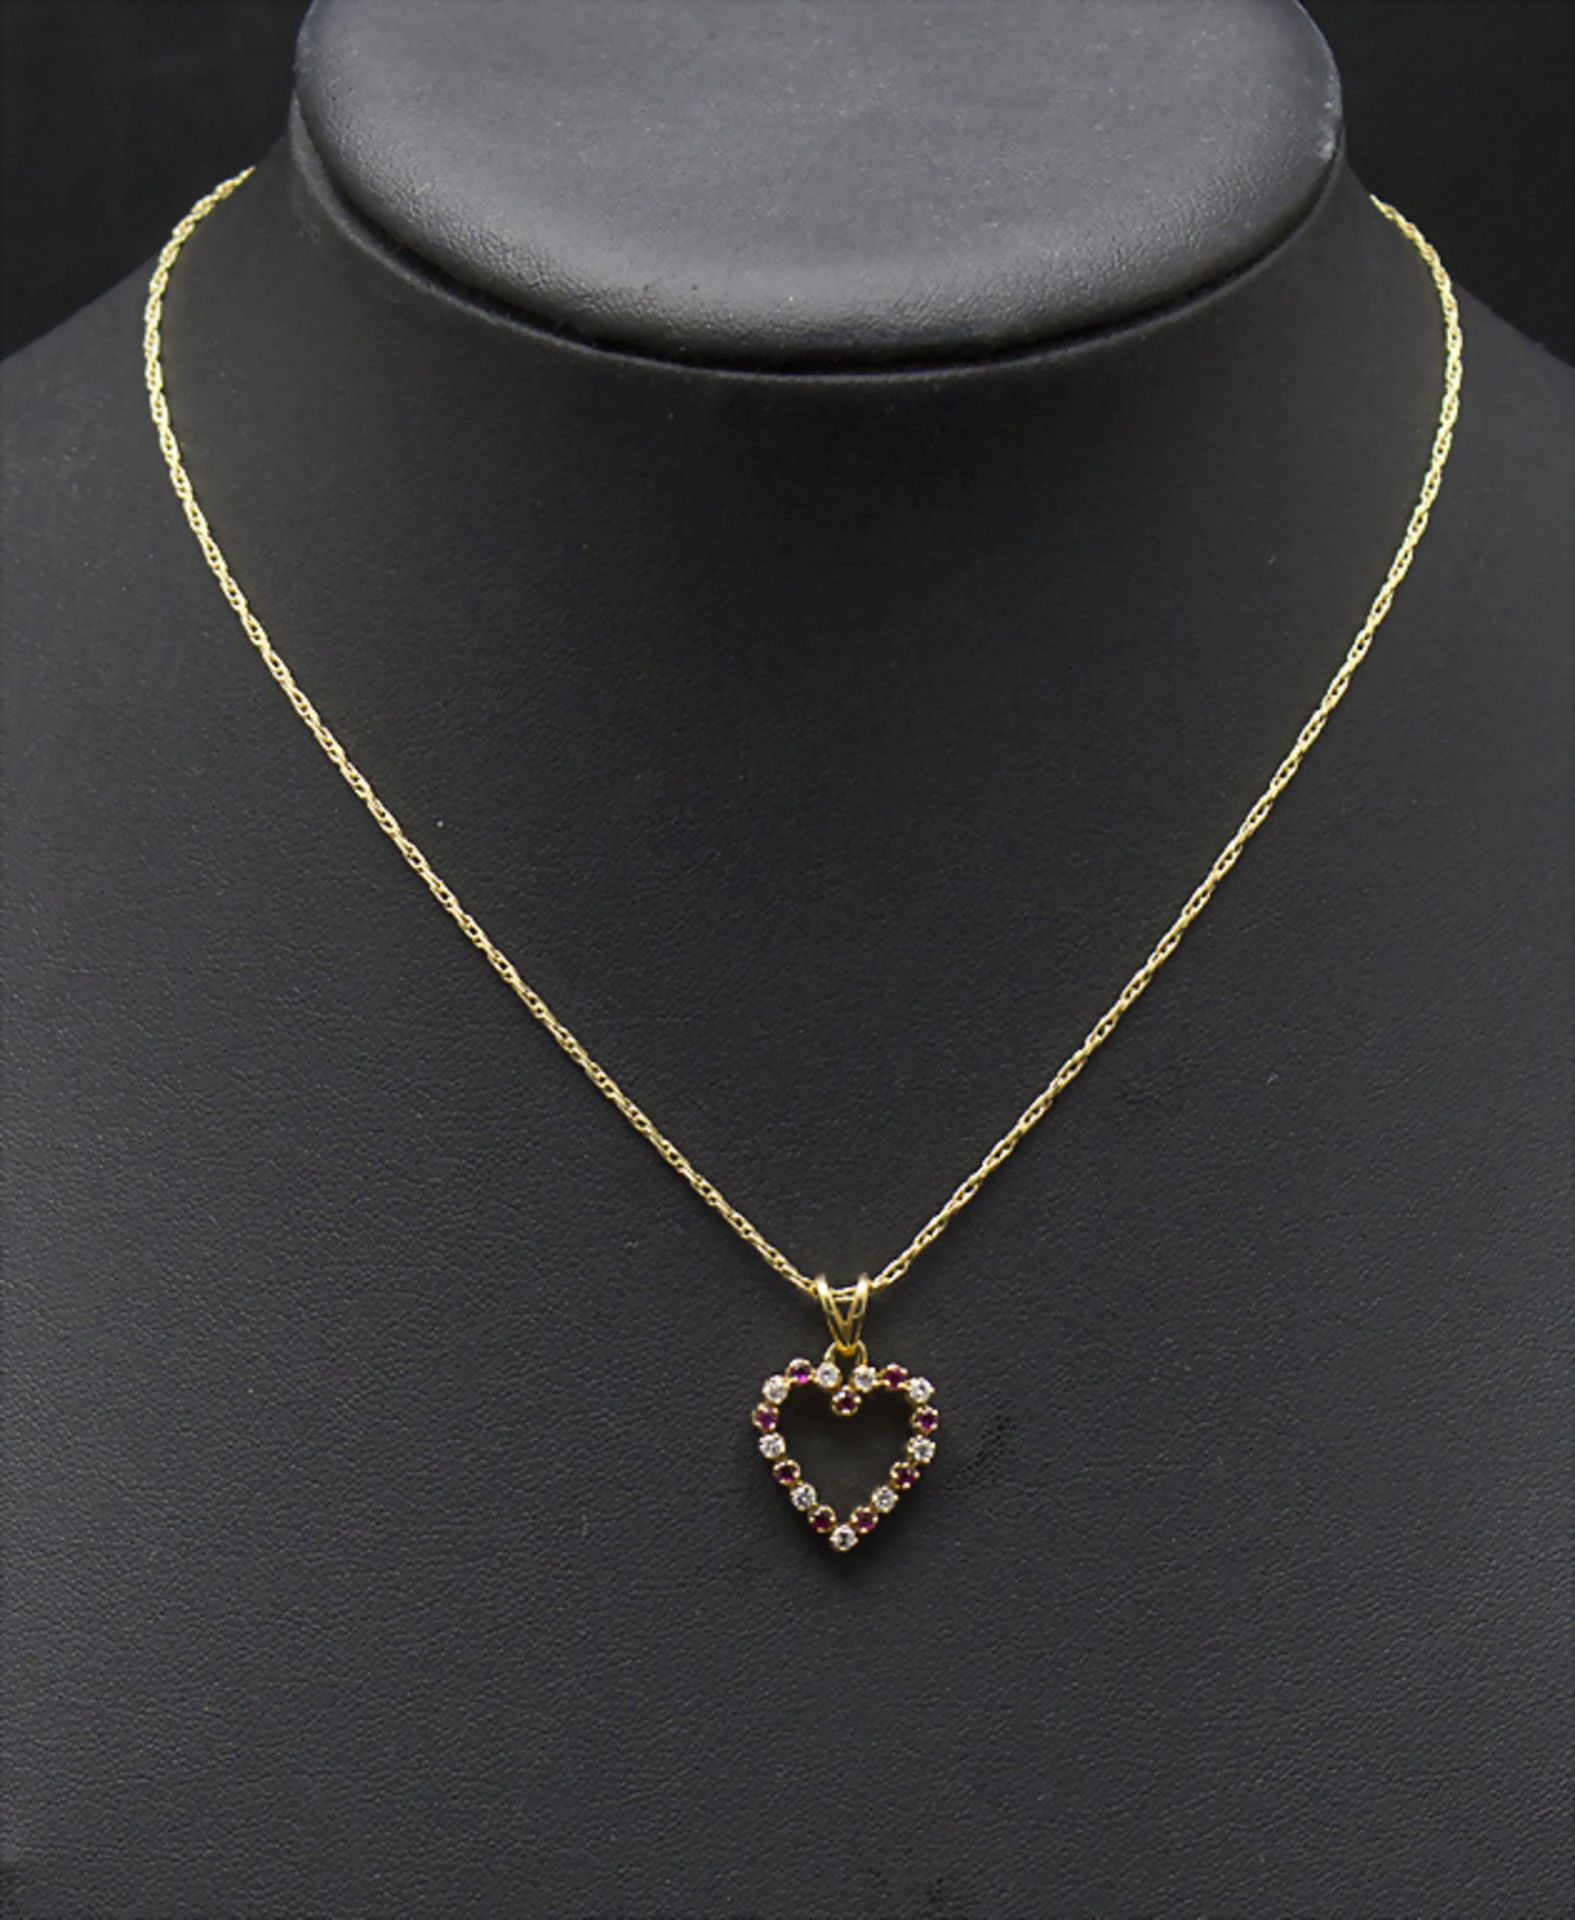 Goldkette mit Herzform-Anhänger / An 18ct gold necklace with pendant with diamonds and rubies